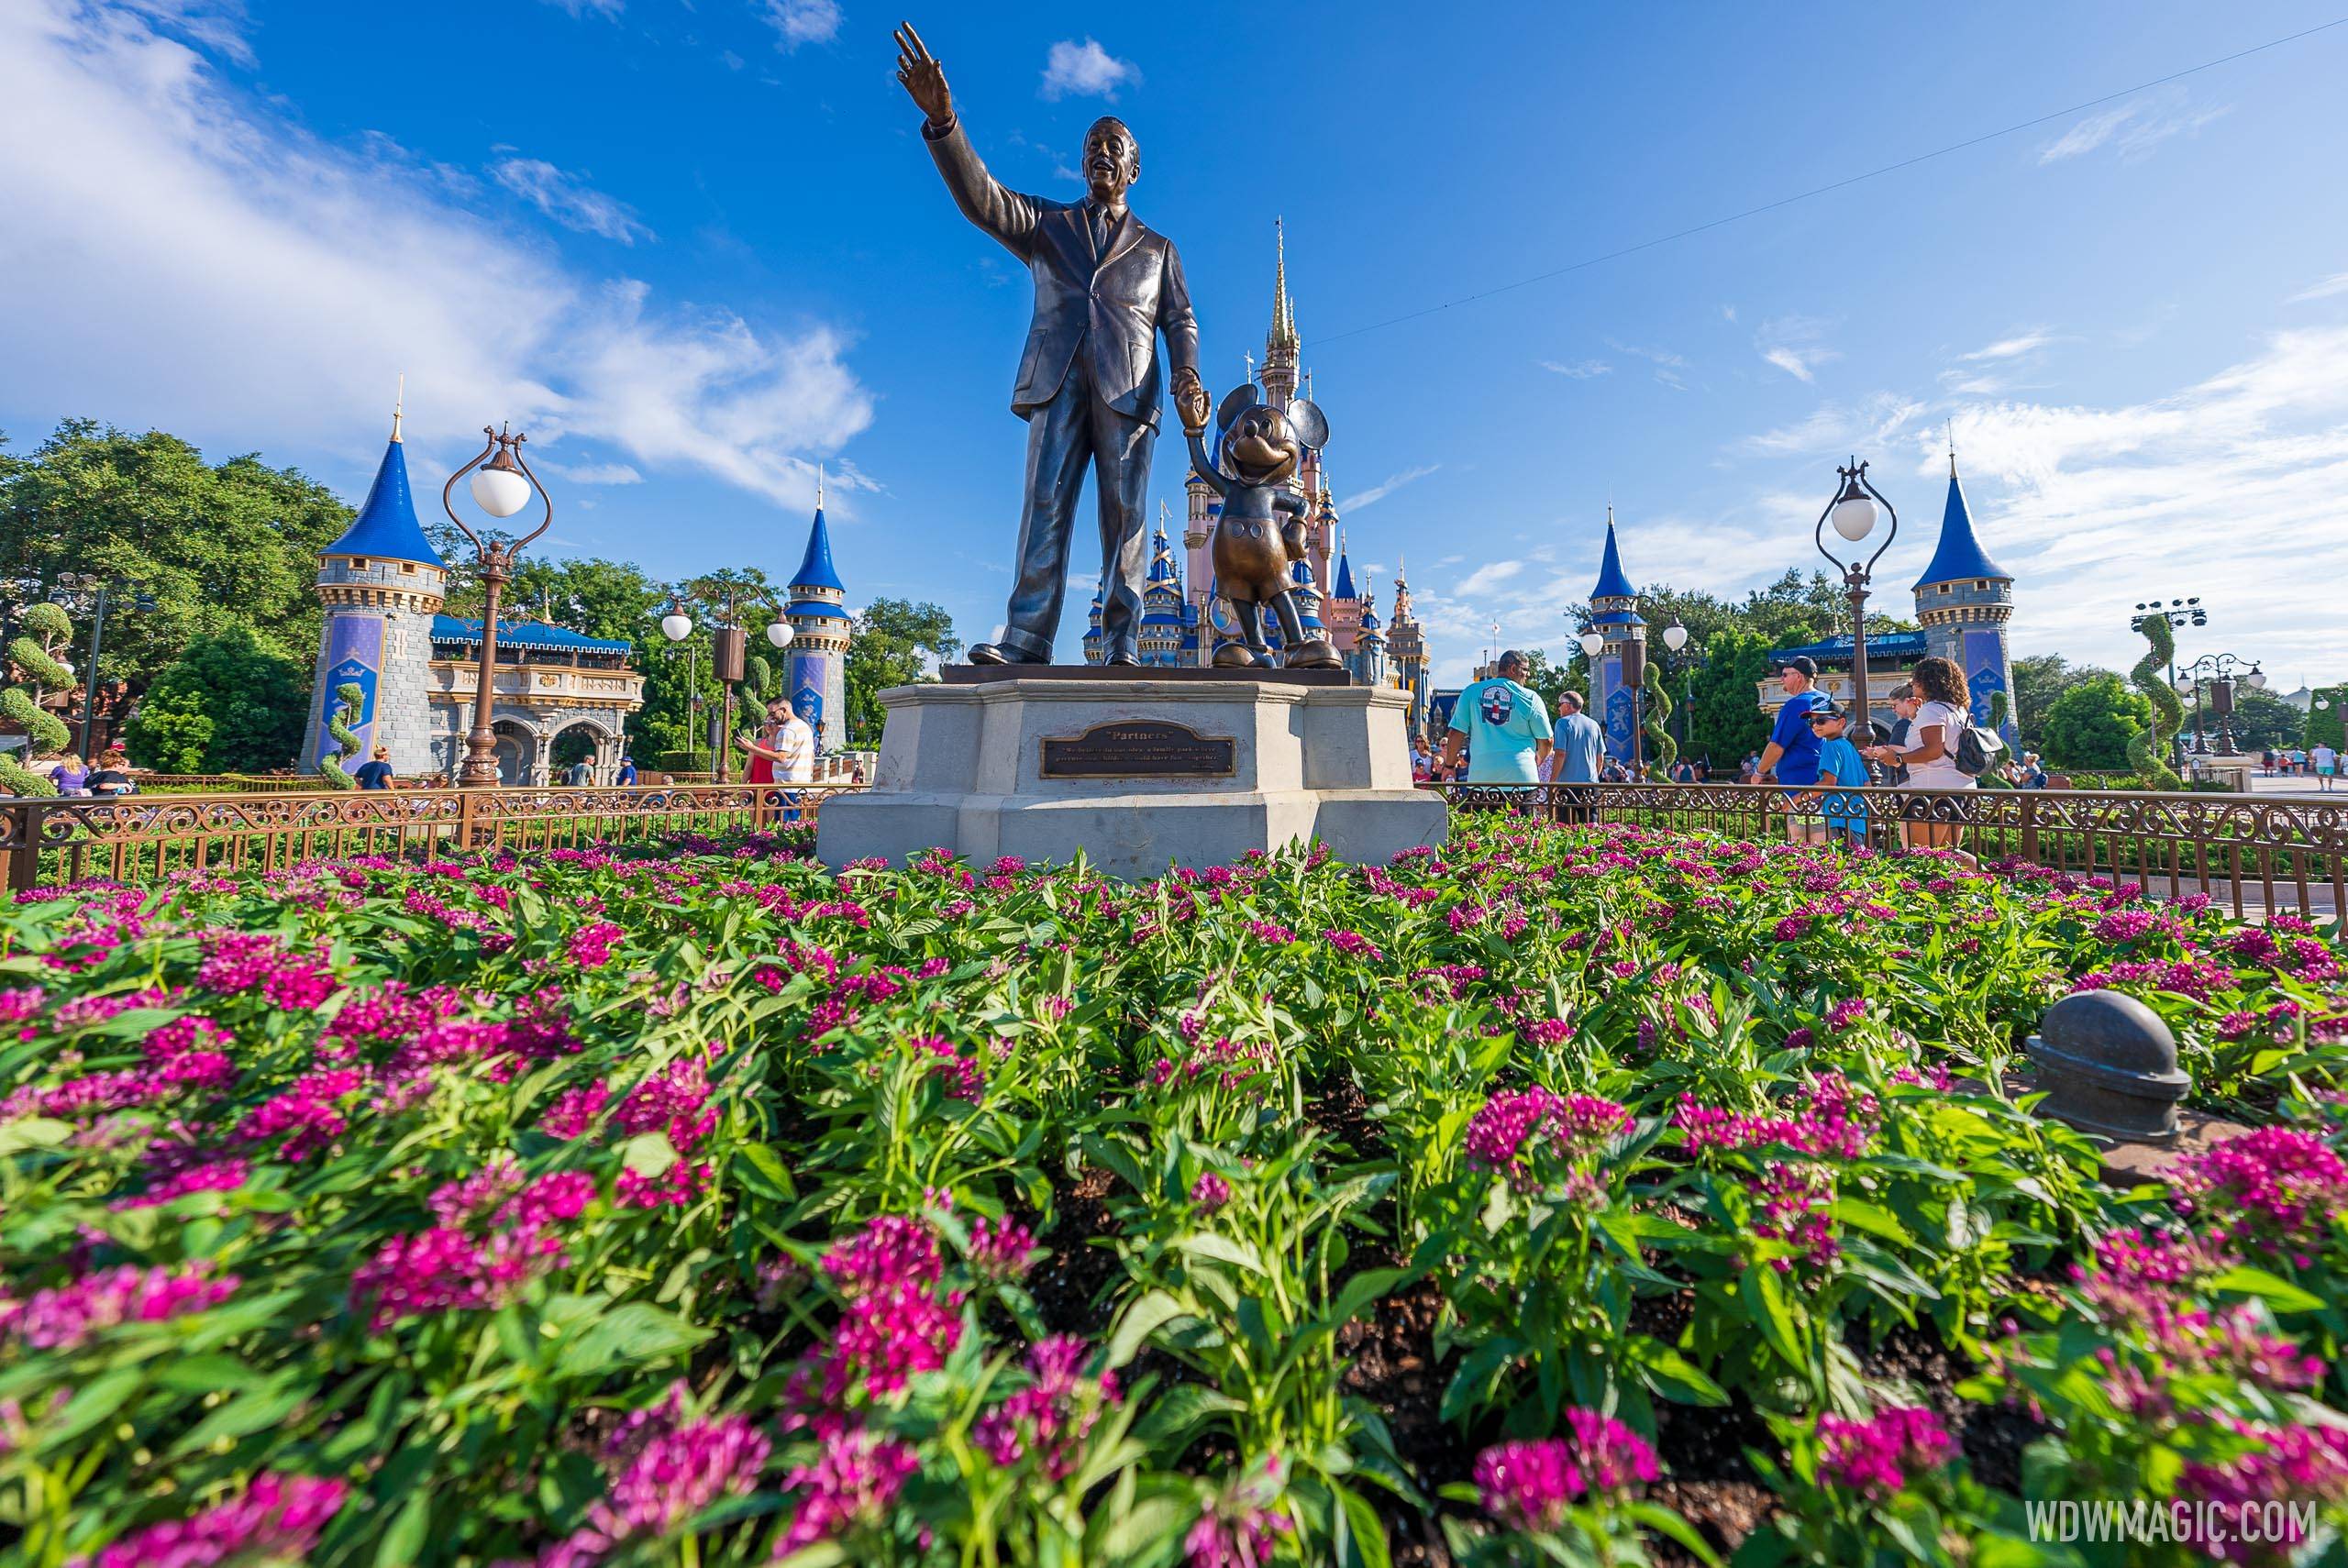 Completed Partners statue refurbishment